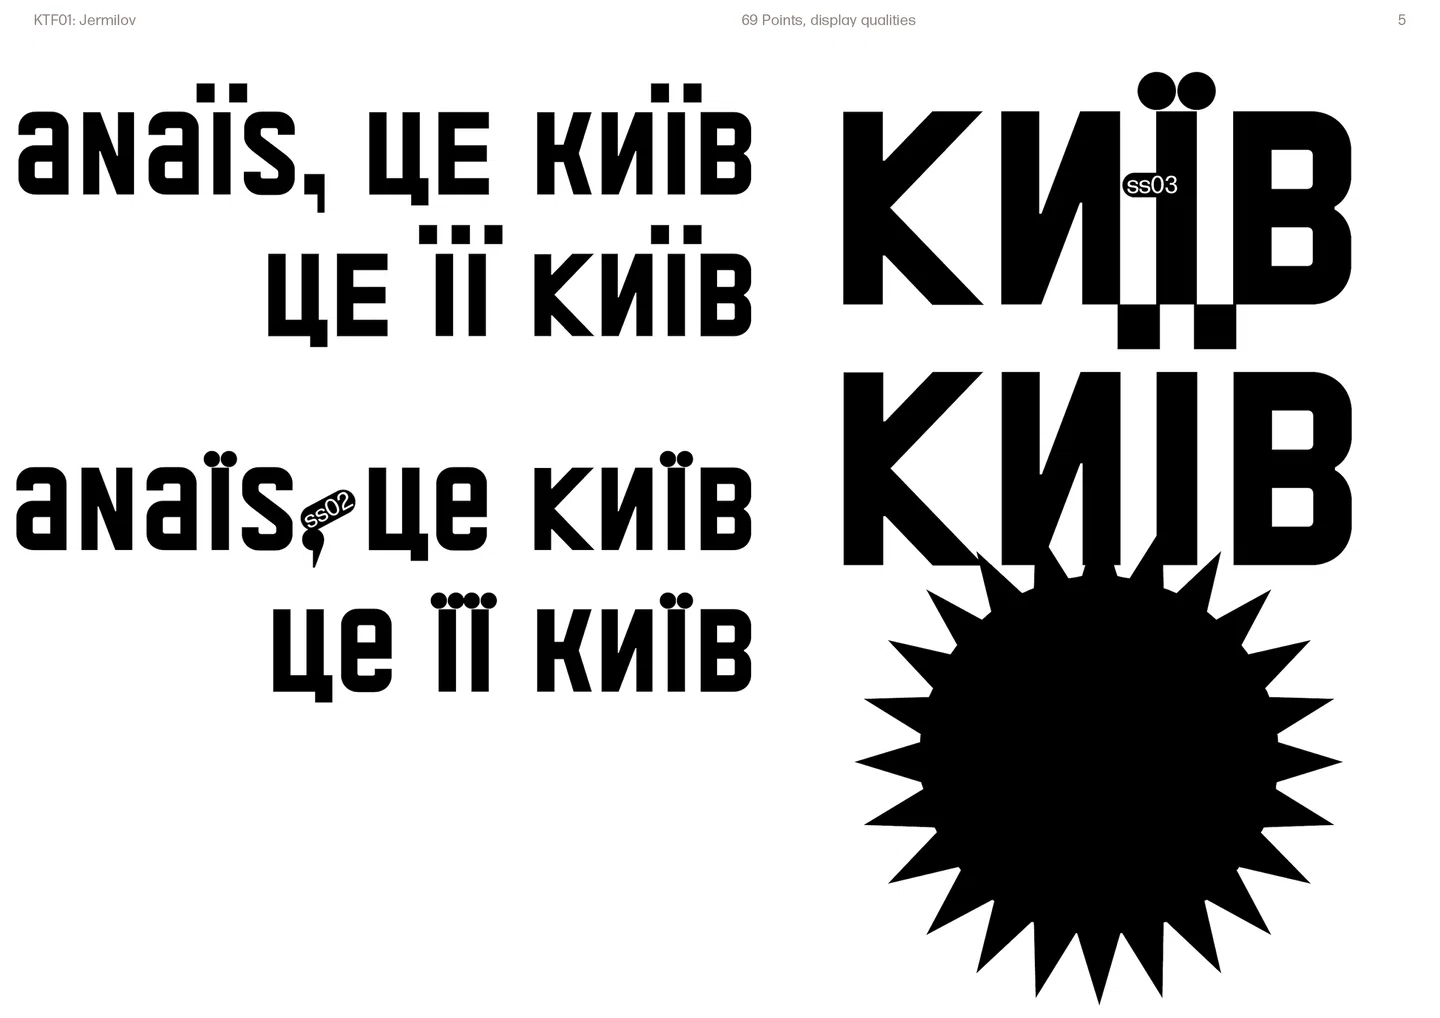 kyiv-type-foundry-b10-graphic-design-itsnicethat.jpg